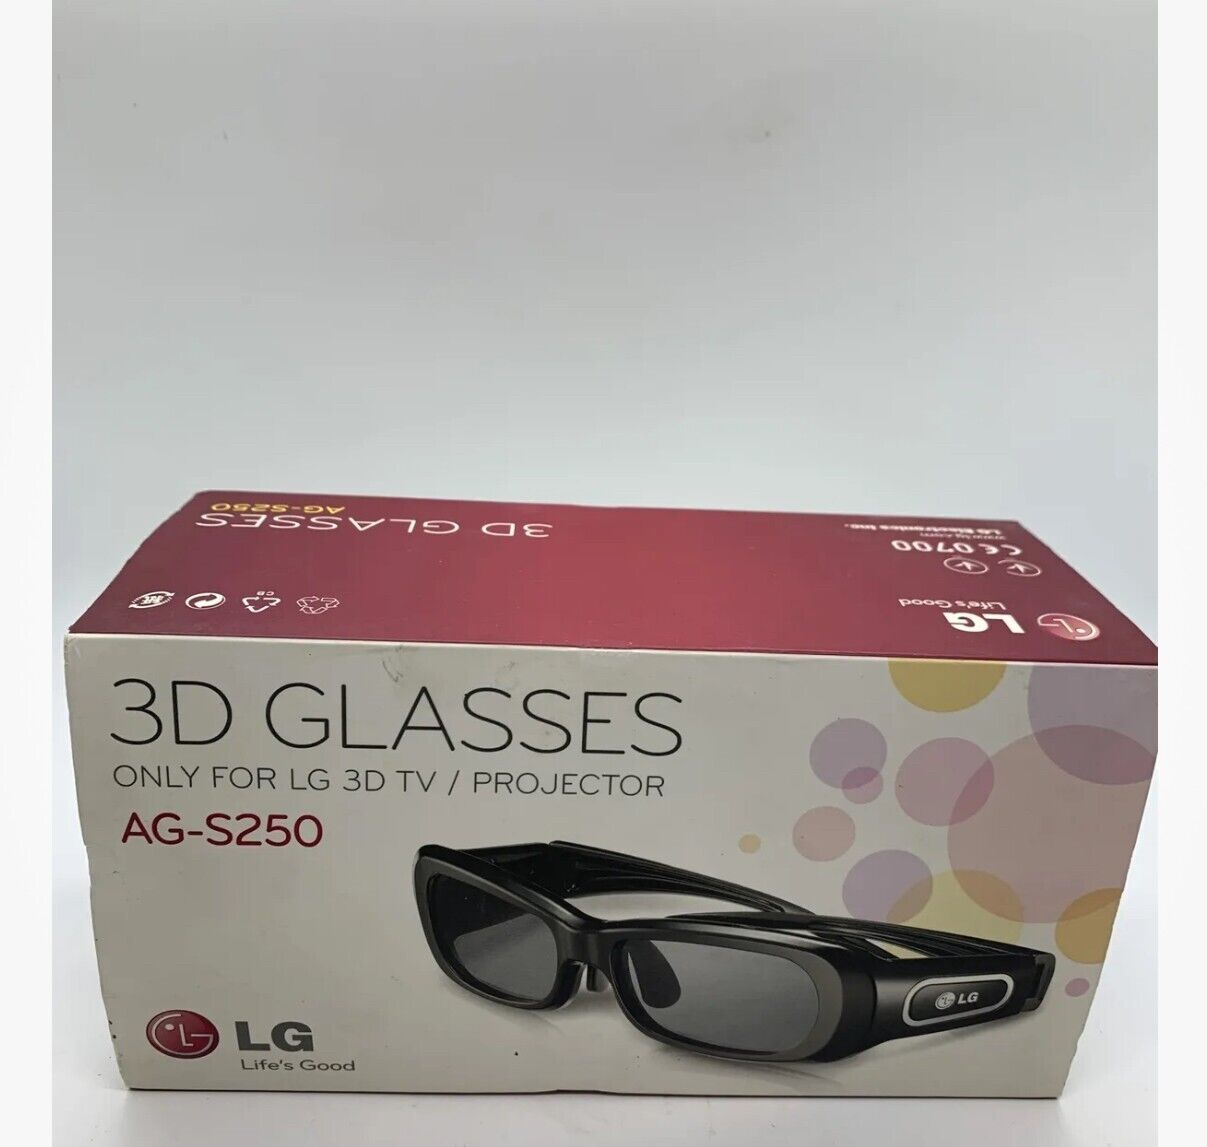 Pair of 2 LG 3D Glasses for TV and Projector AG-S250 New Open Box No Charger